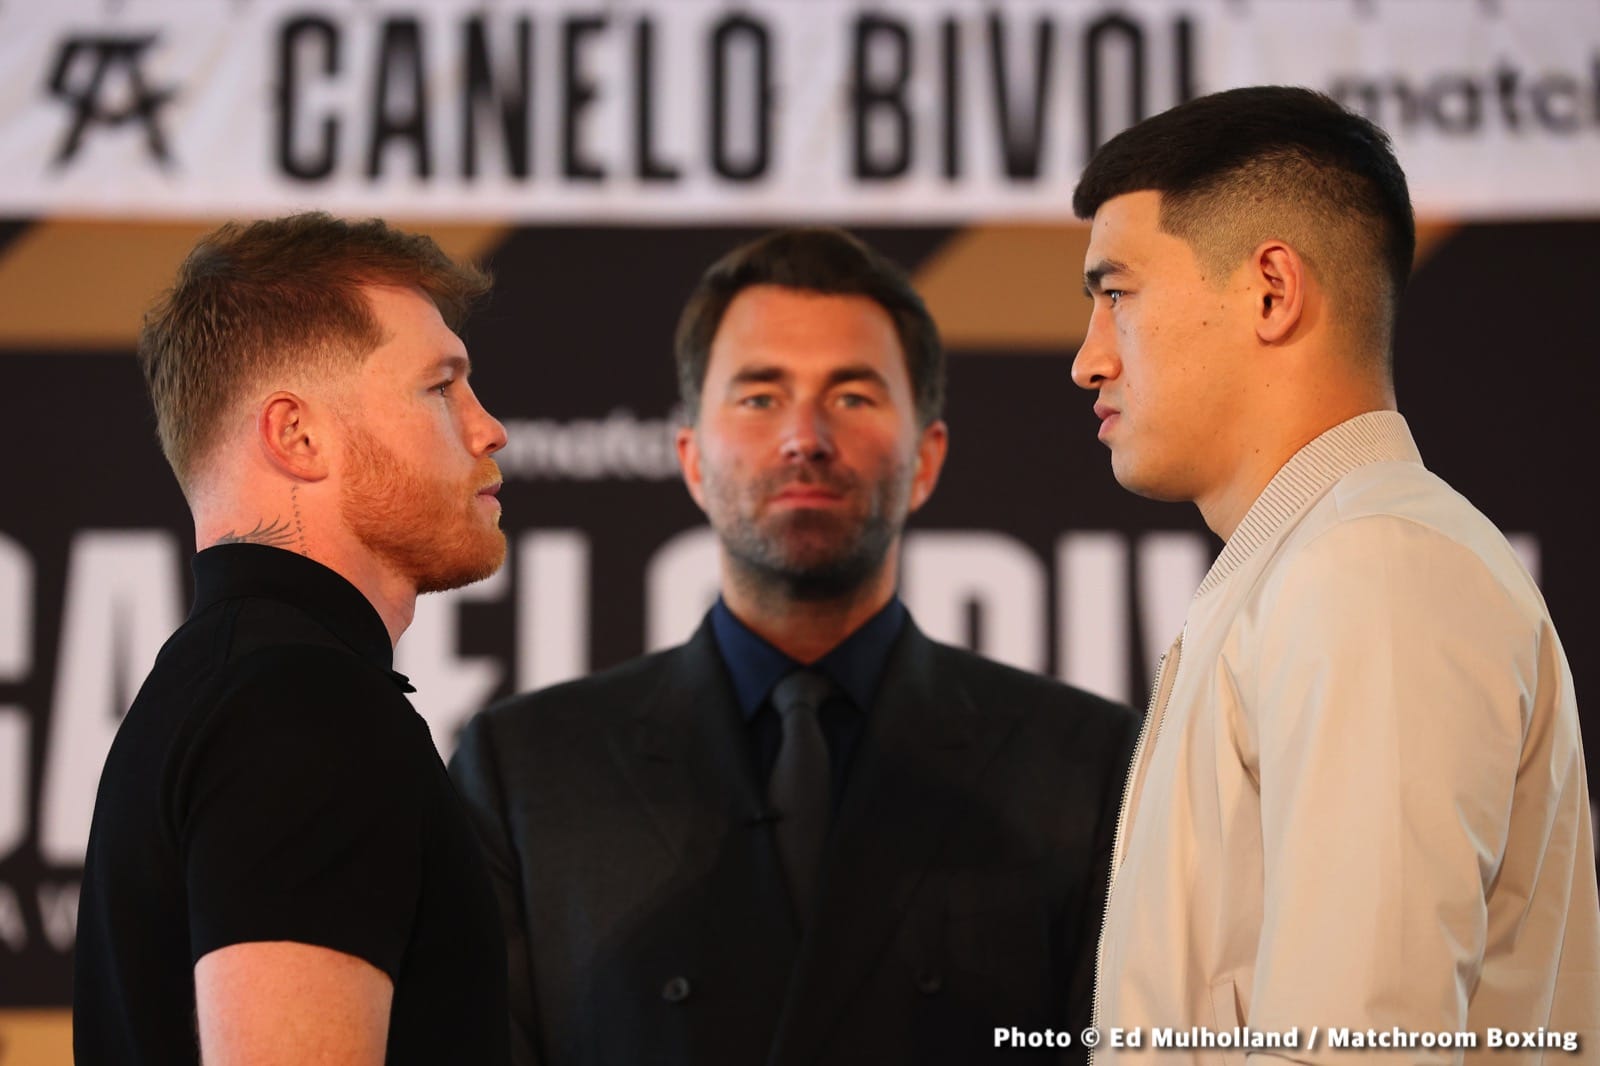 Canelo didn't want a catchweight for Bivol fight